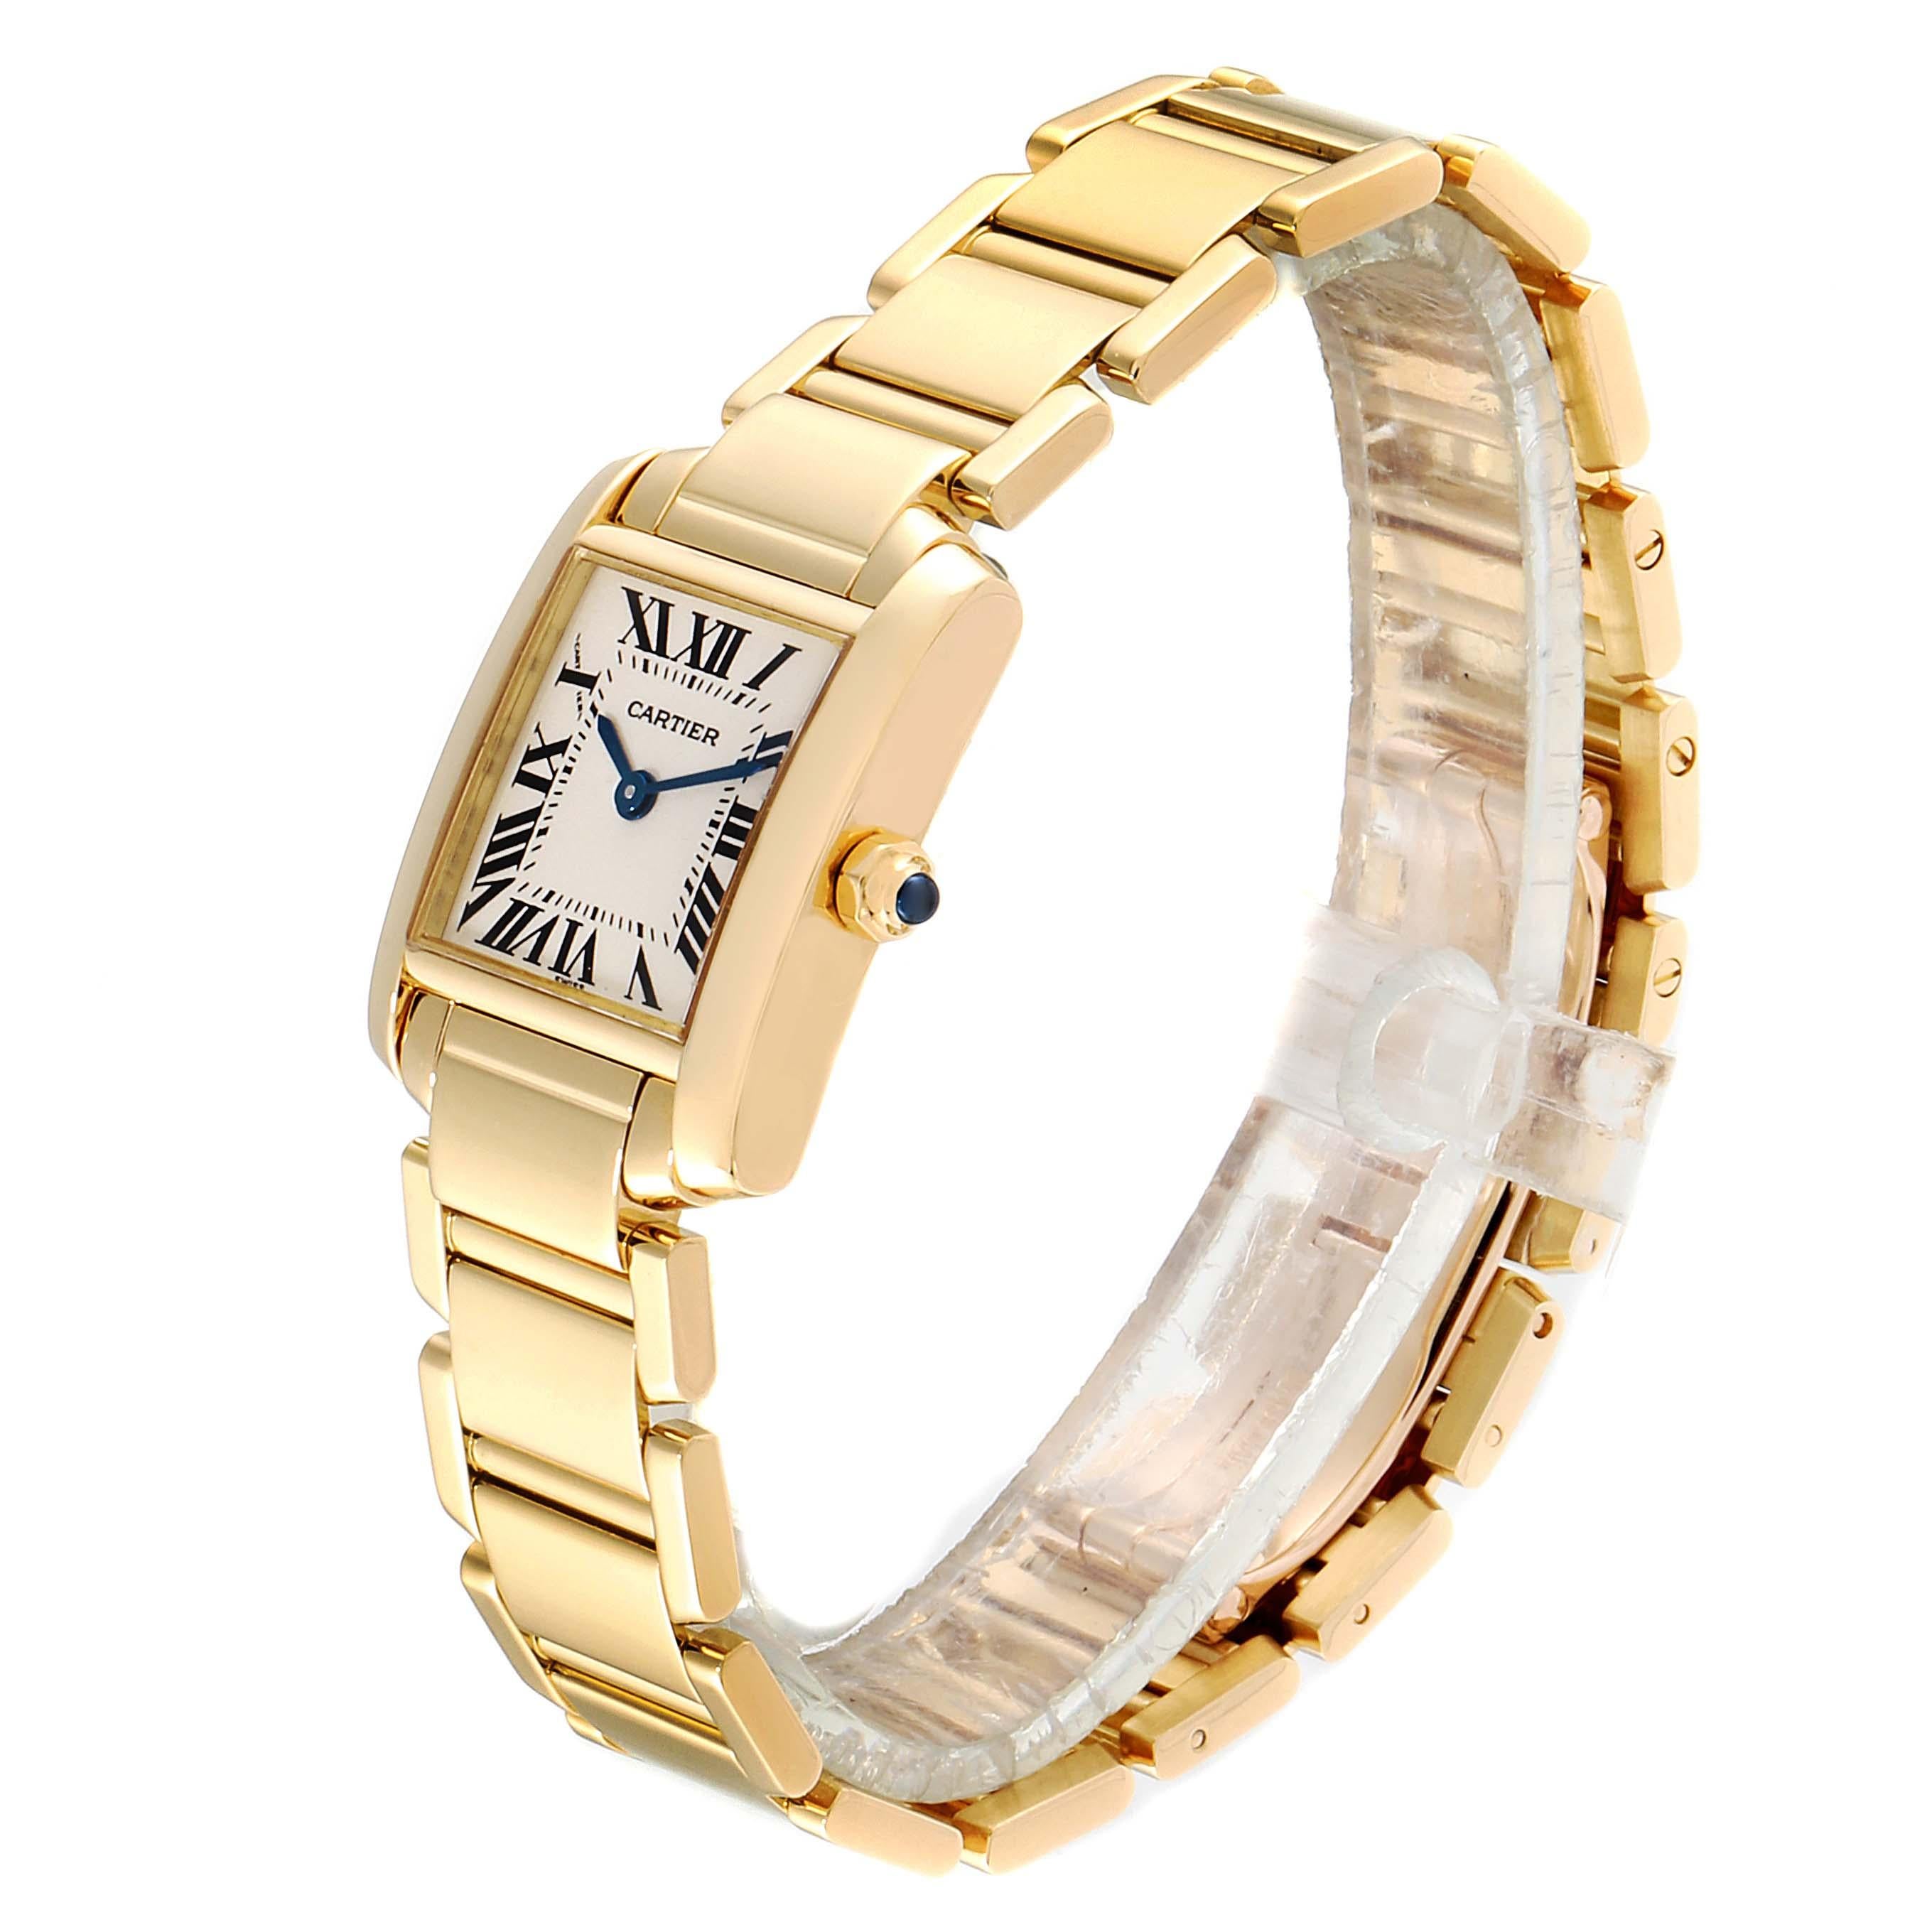 Cartier Tank Francaise Yellow Gold Quartz Ladies Watch W50002N2 In Excellent Condition For Sale In Atlanta, GA